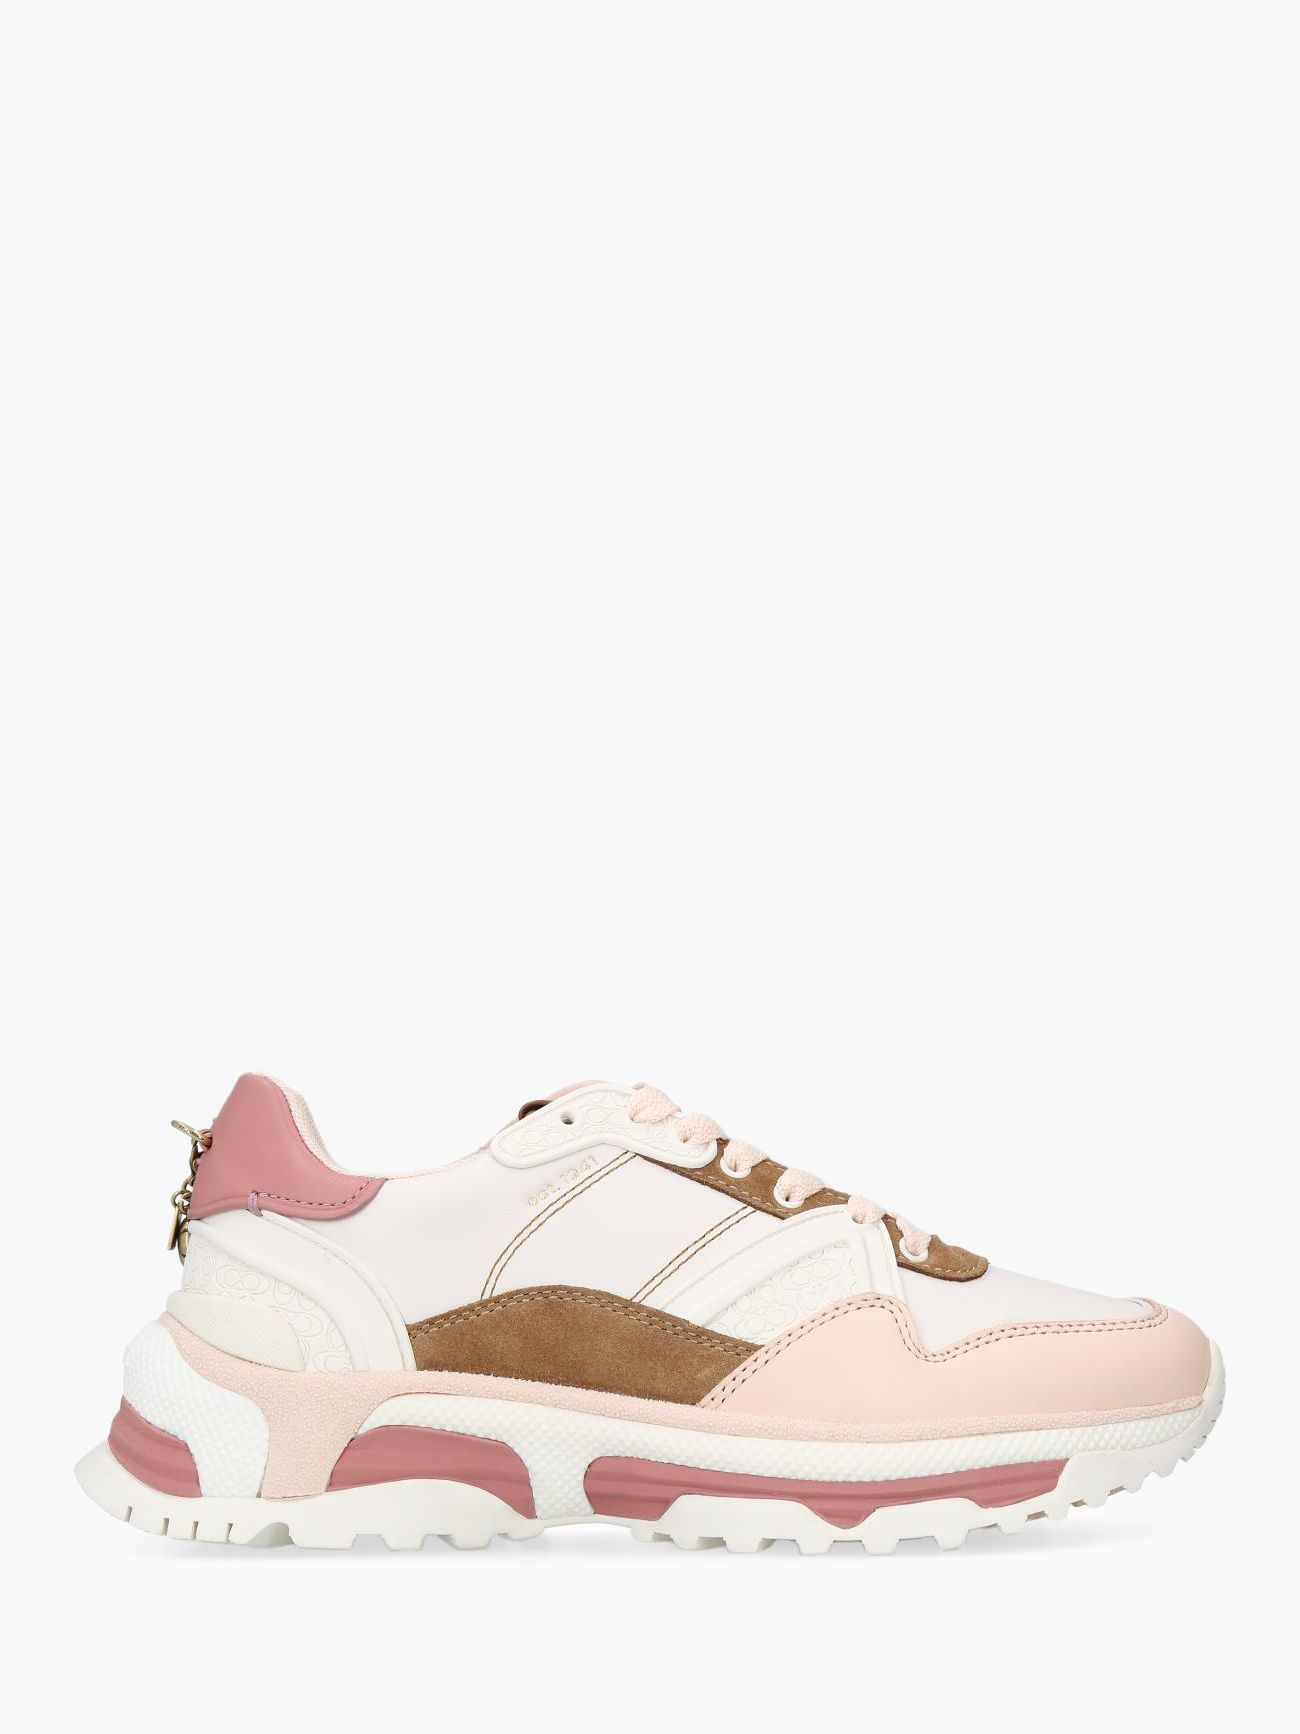 Coach C143 Runner Lace Up Trainers, White/Pink Suede at John Lewis ...